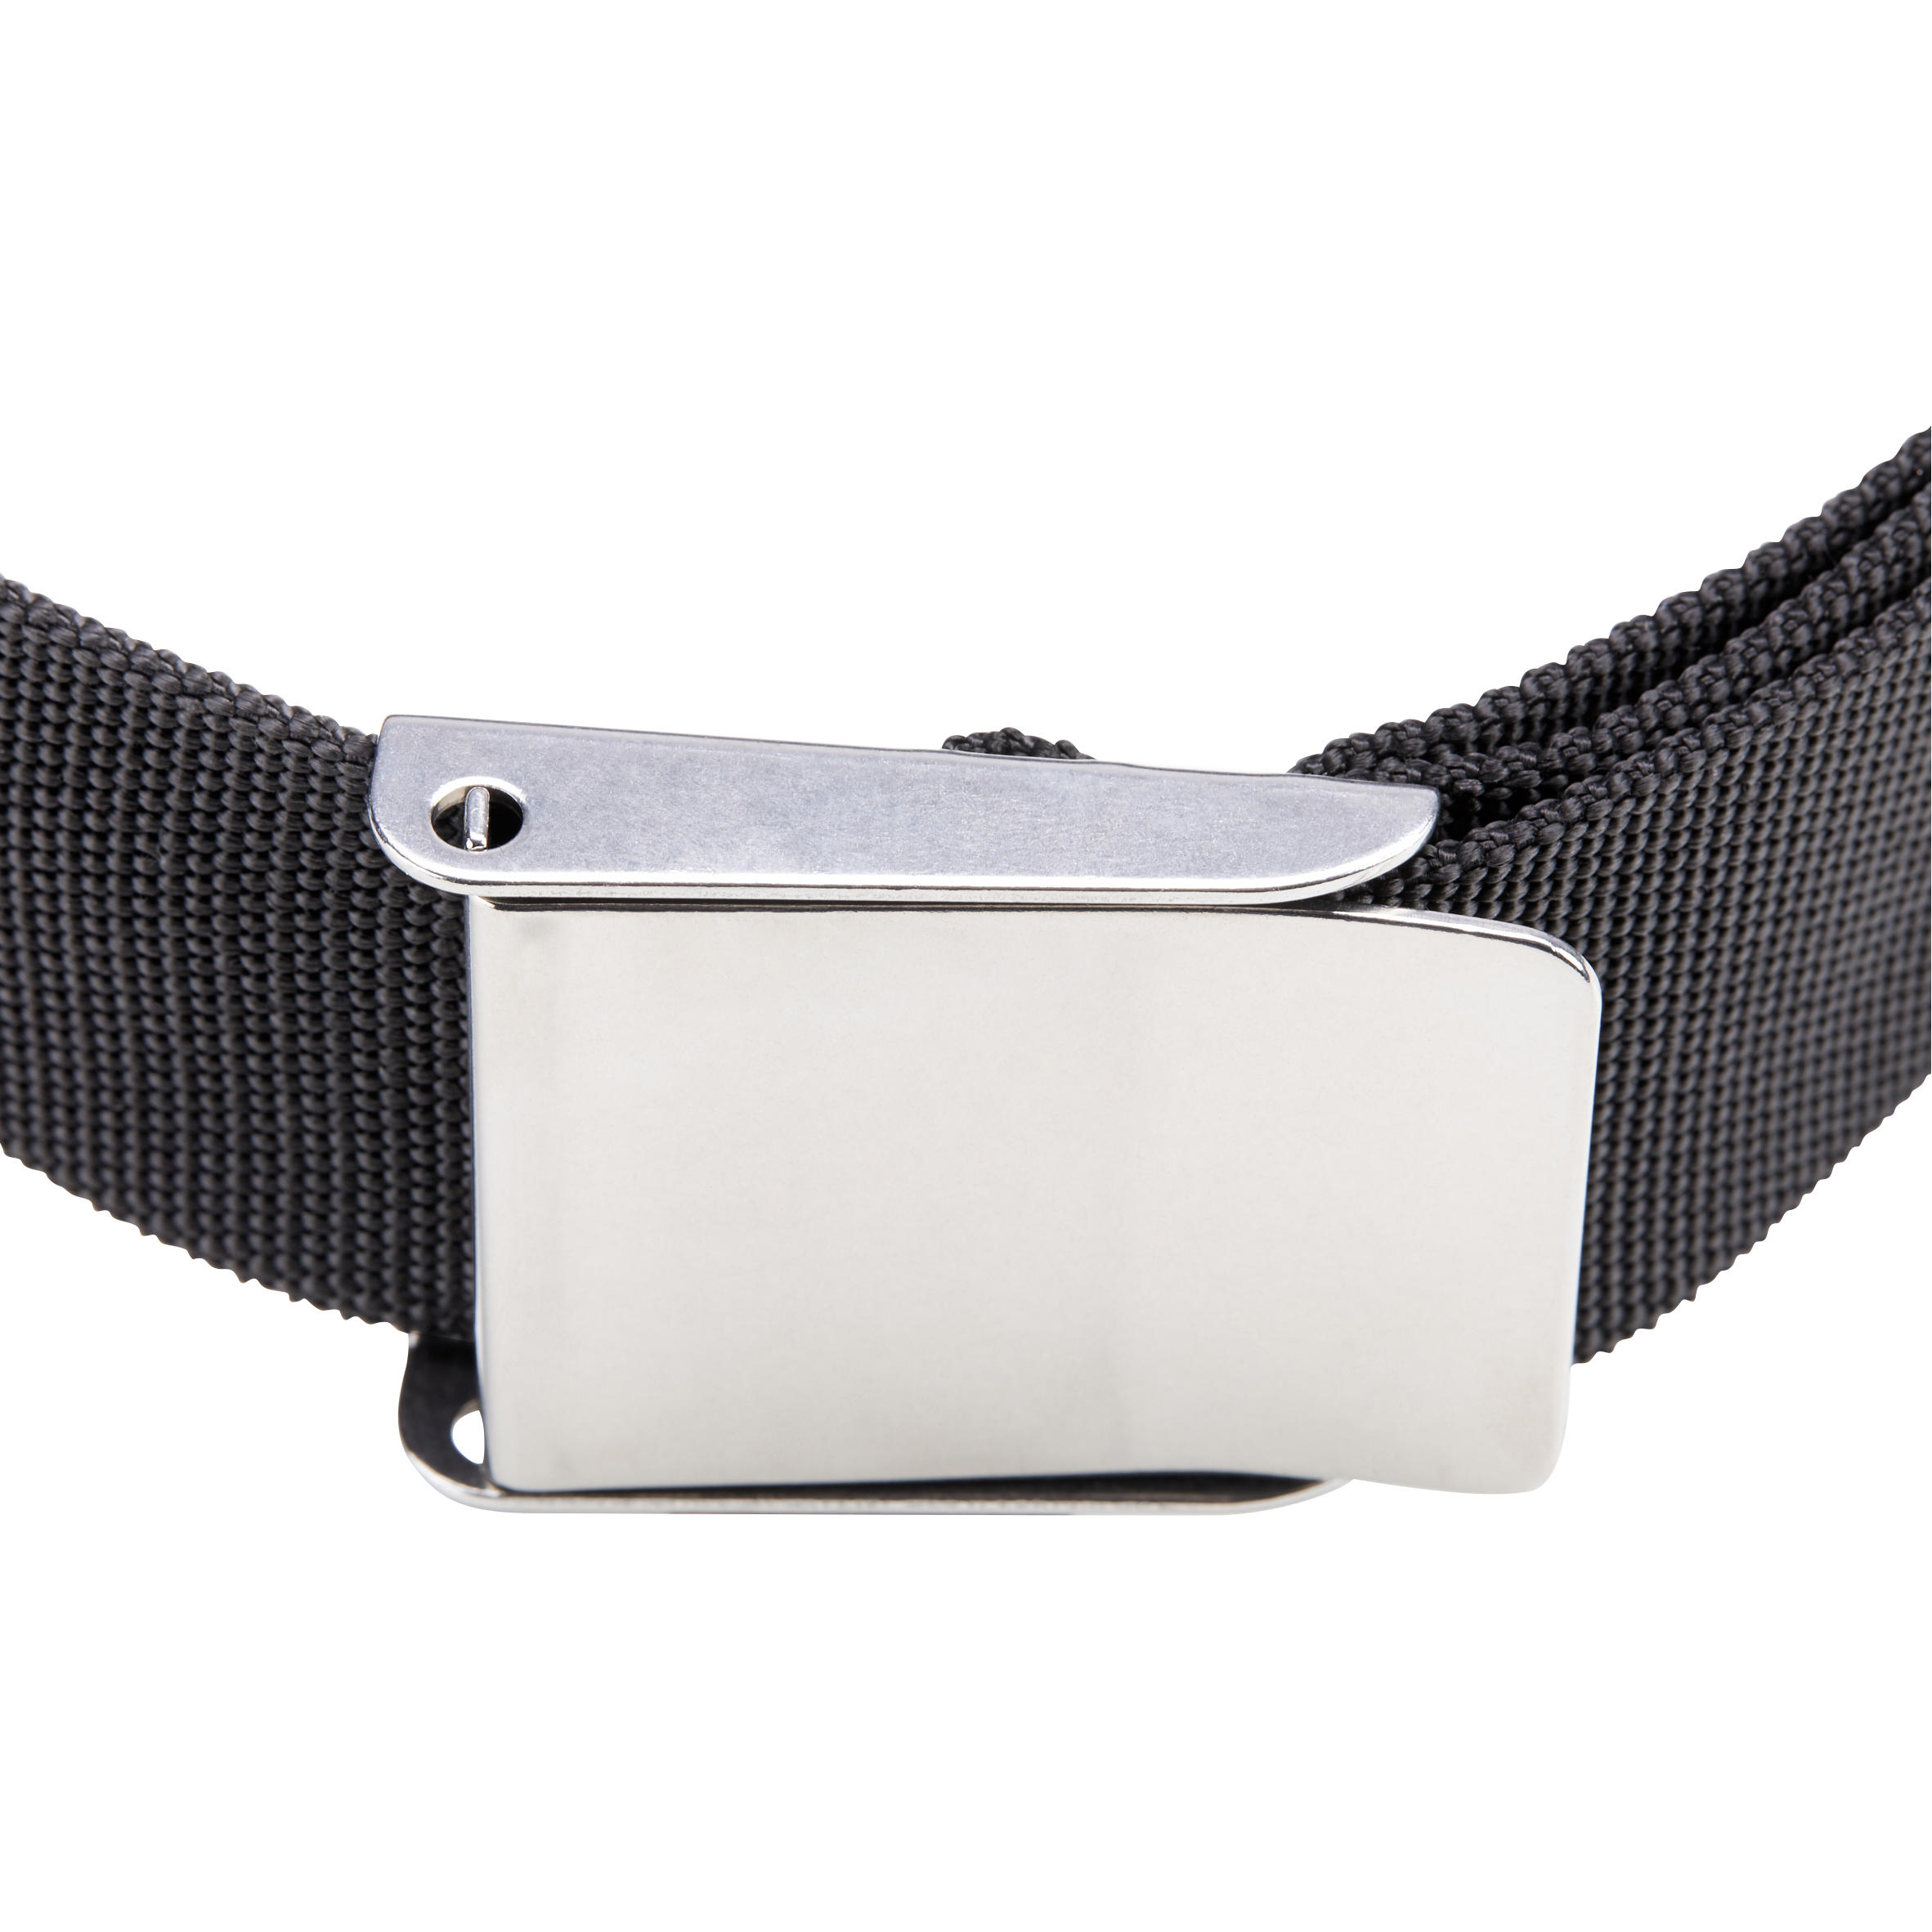 Diving weight belt with soft pockets for lead weights 2/7